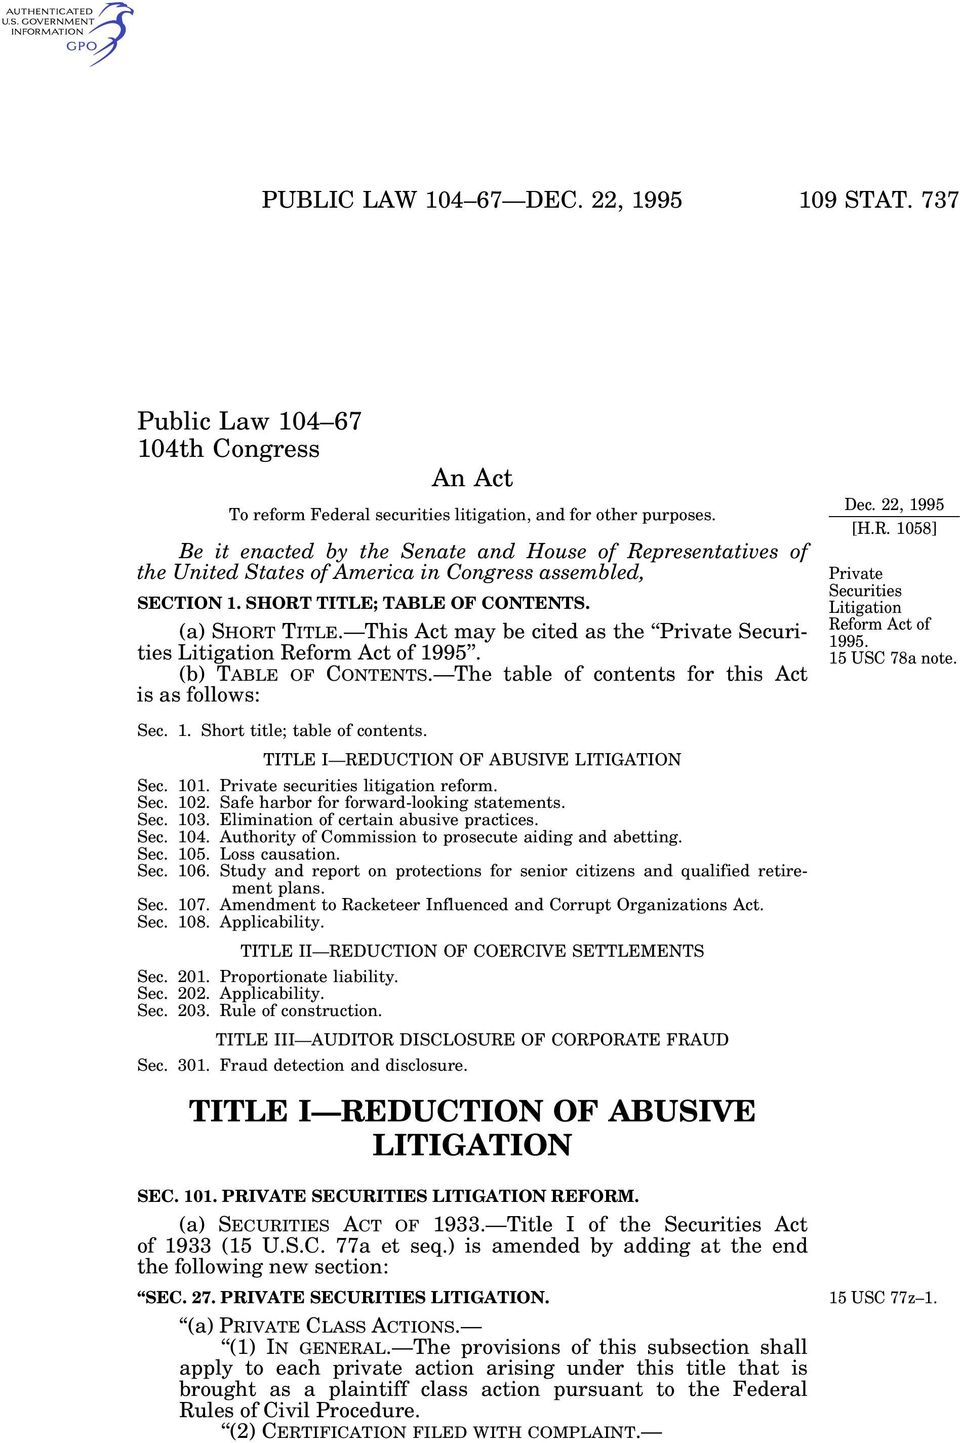 This Act may be cited as the Private Securities Litigation Reform Act of 1995. (b) TABLE OF CONTENTS. The table of contents for this Act is as follows: Sec. 1. Short title; table of contents.